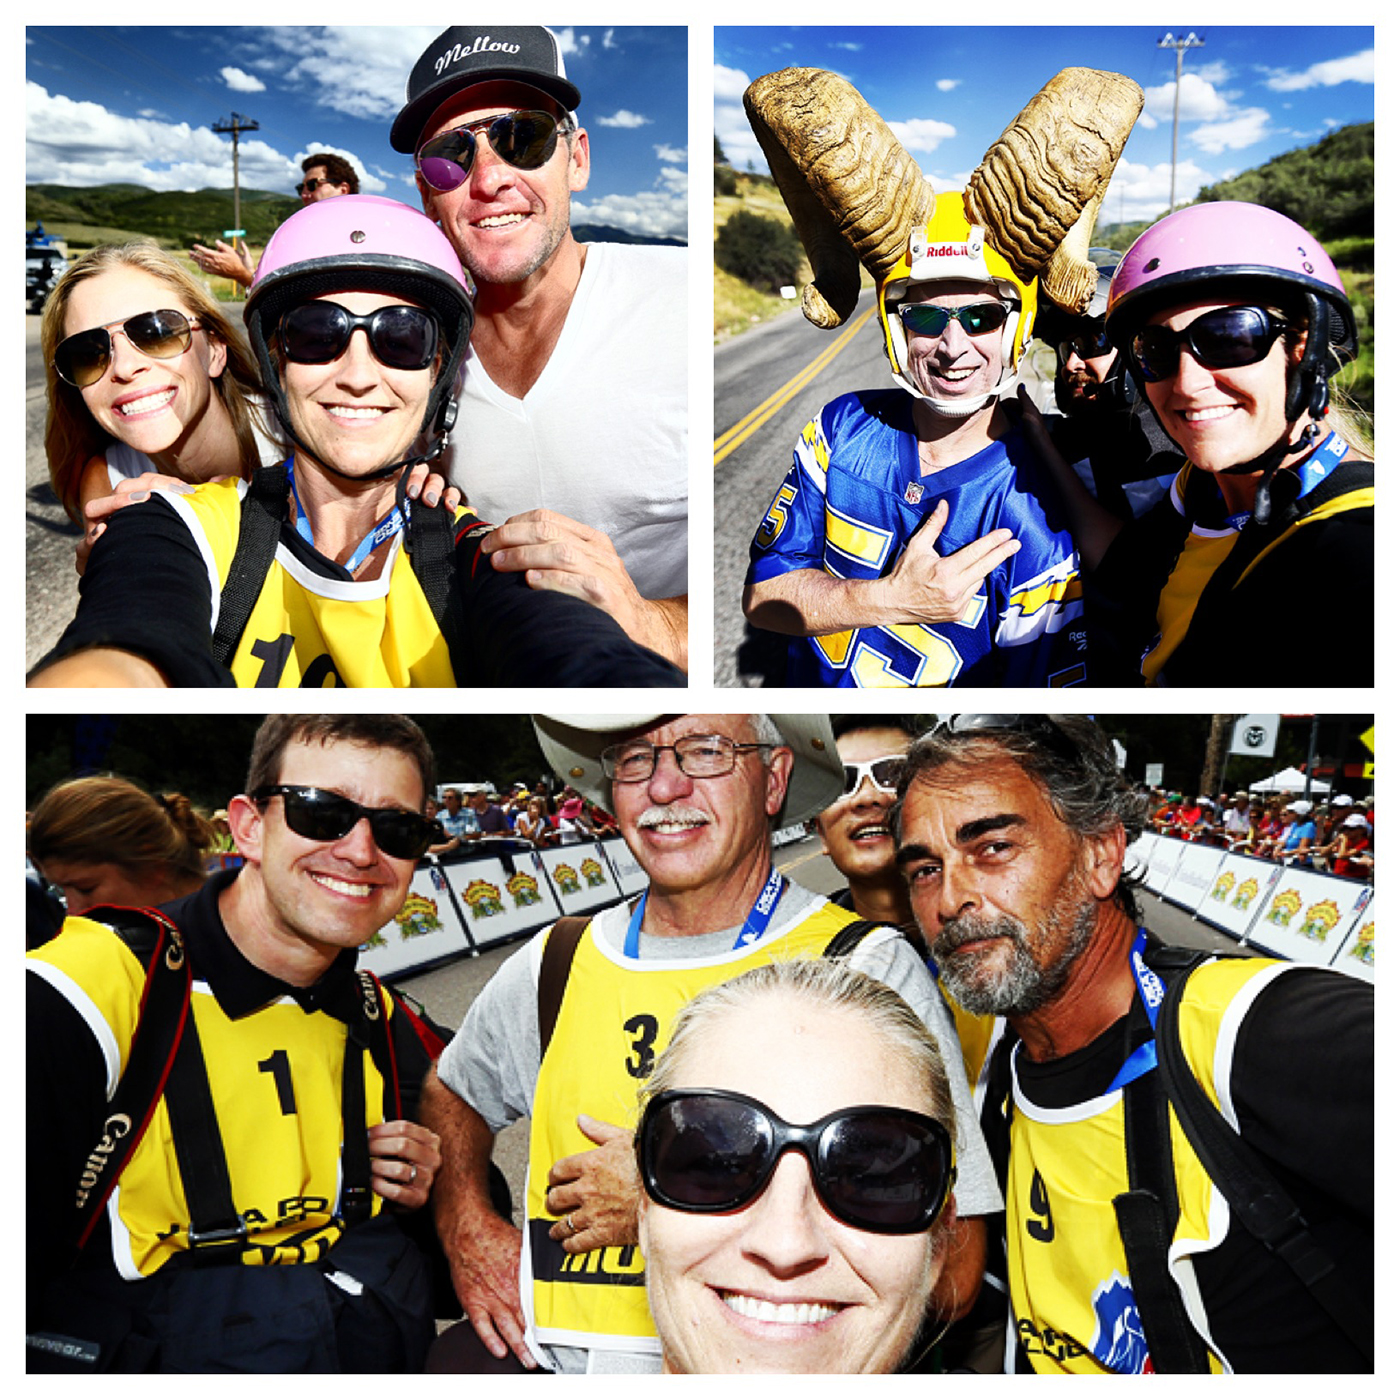 USA Pro Challenge cycling race selfies with Lance and Anna, my photog peeps and superfan Dore in Aspen, Colorado August 18, 2014